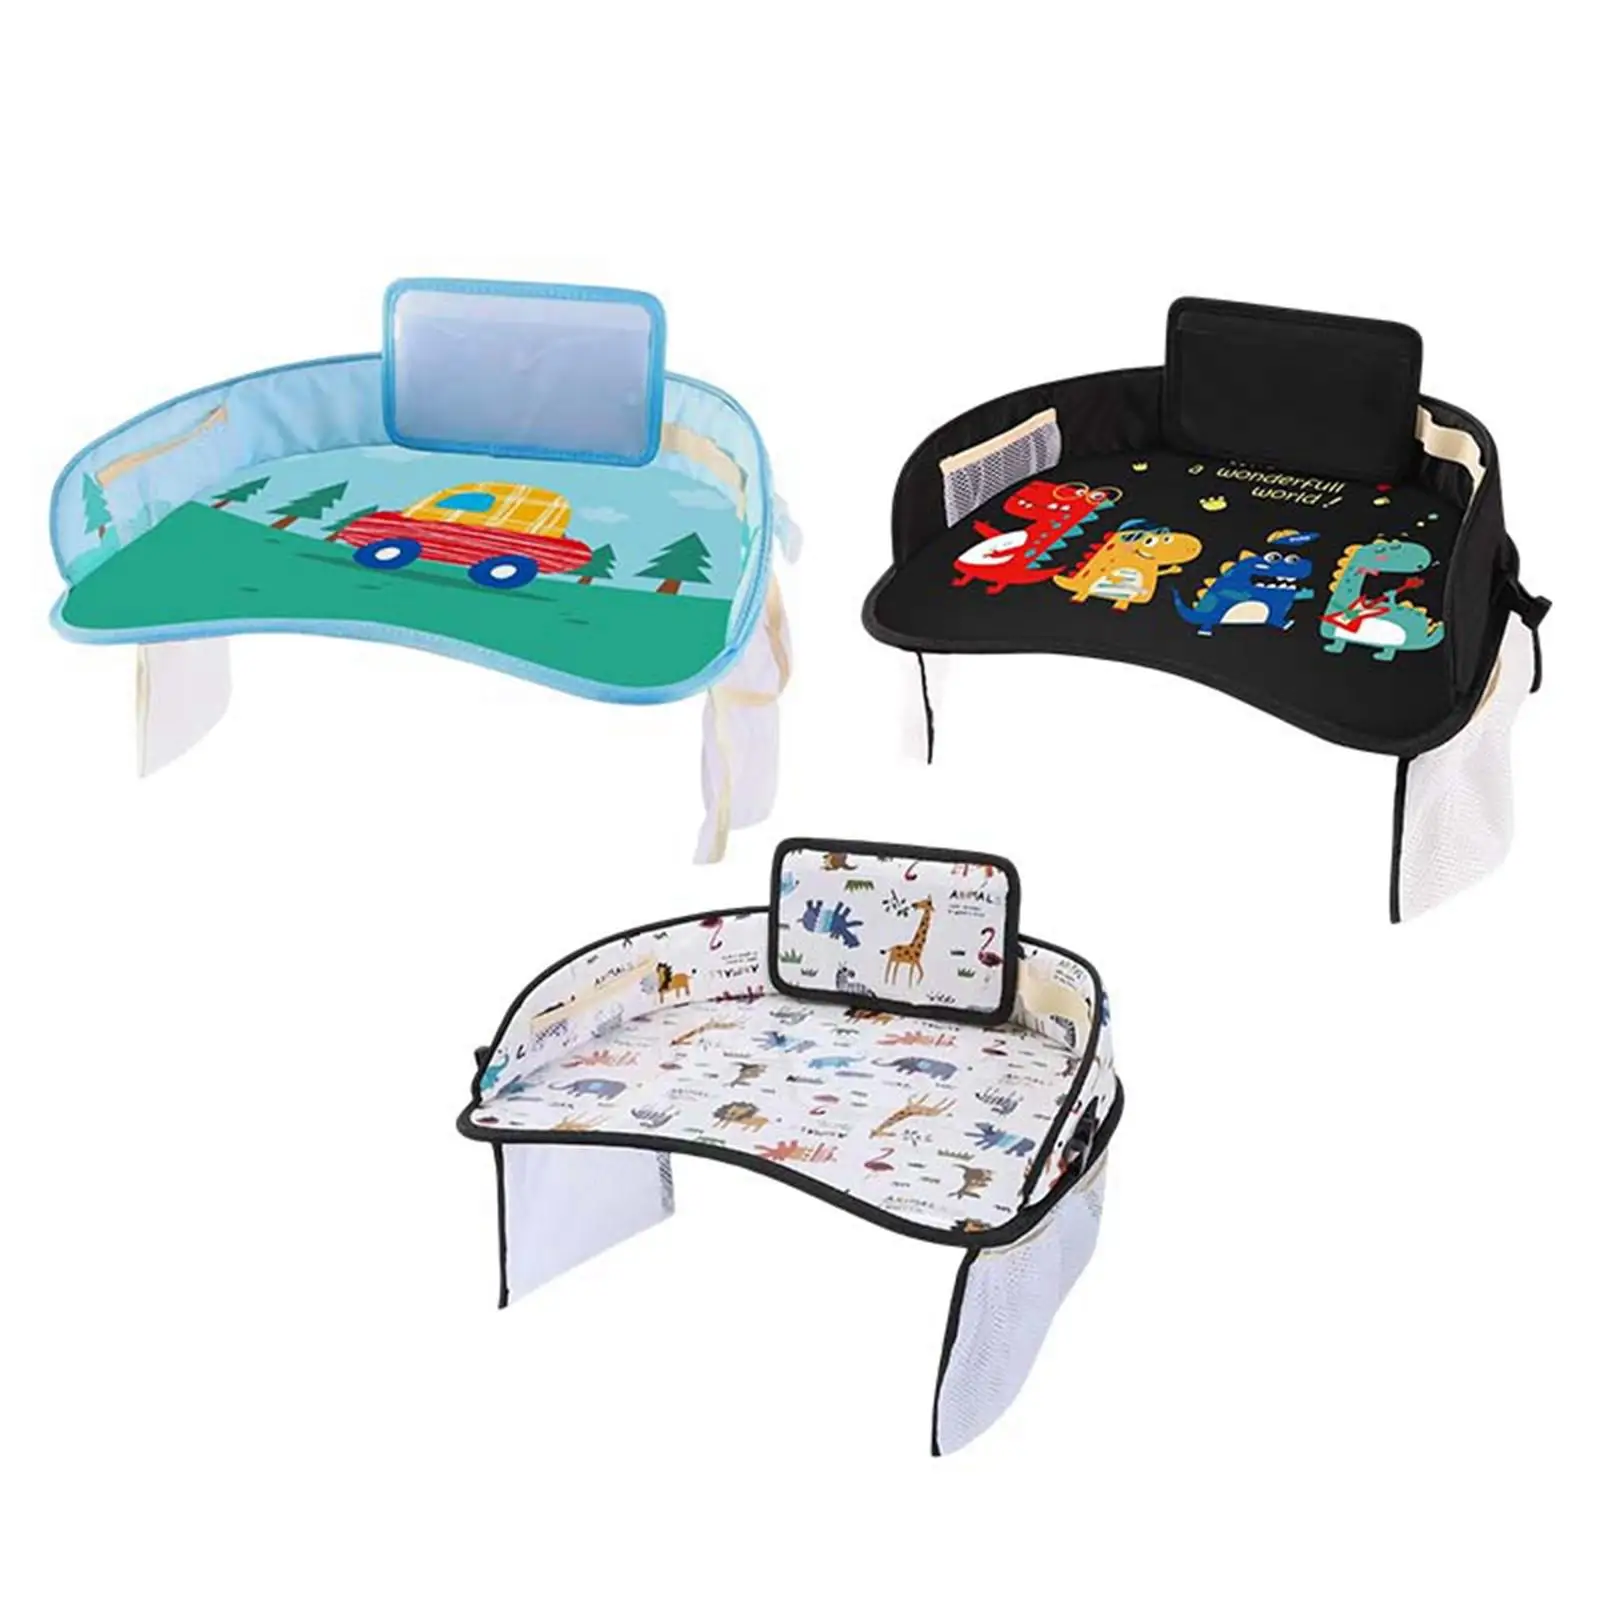 Kids Holder Stand Eating Drawing Snack Activity Tray Toddler Organizer for Baby Kids